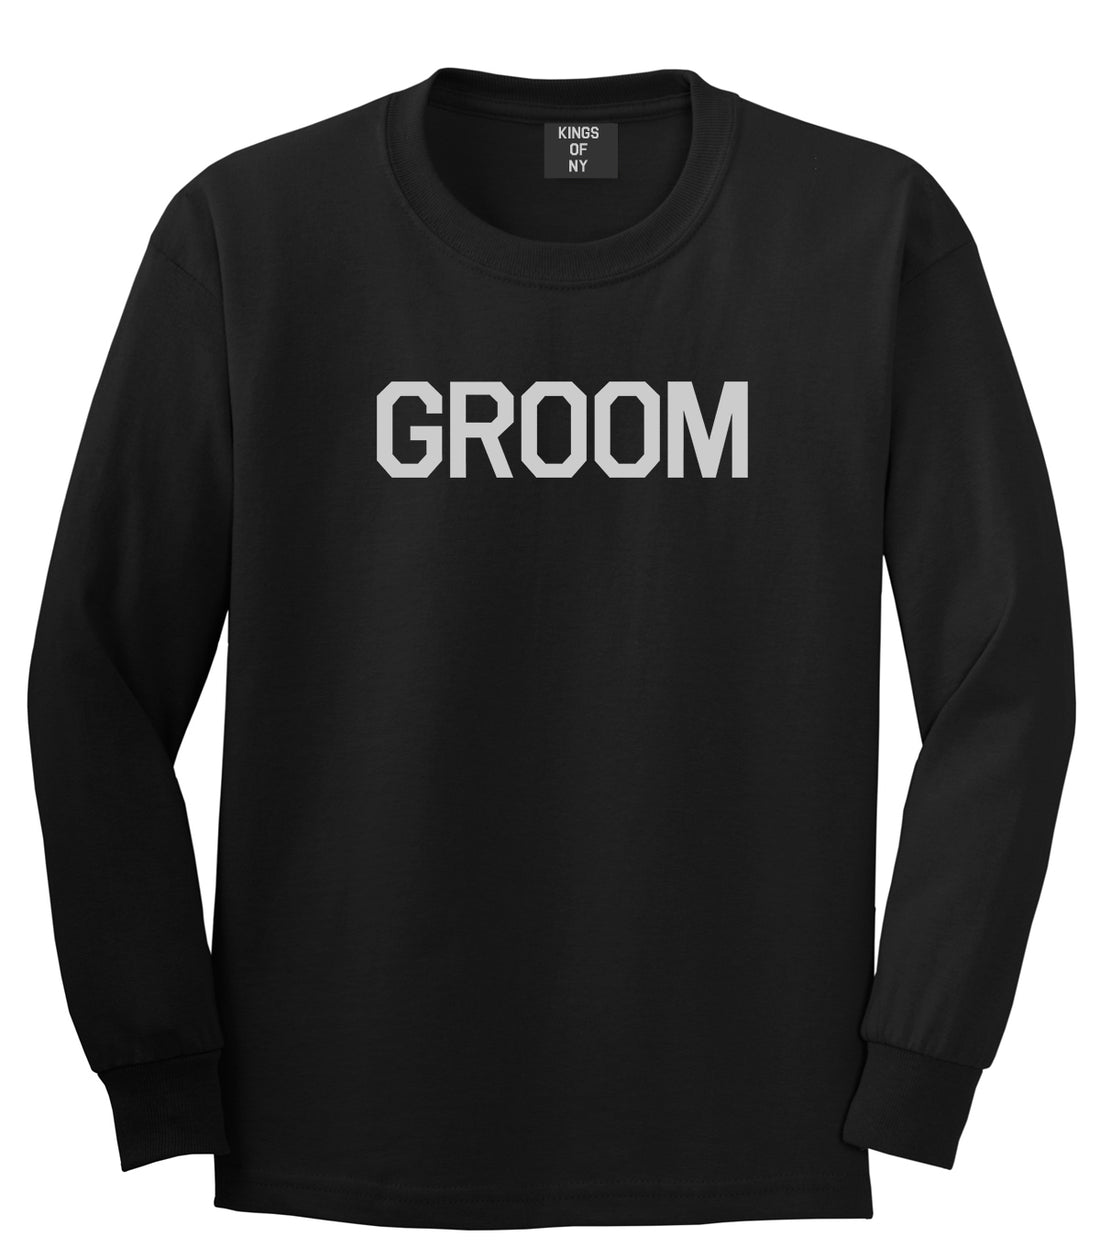 The Groom Bachelor Party Black Long Sleeve T-Shirt by Kings Of NY